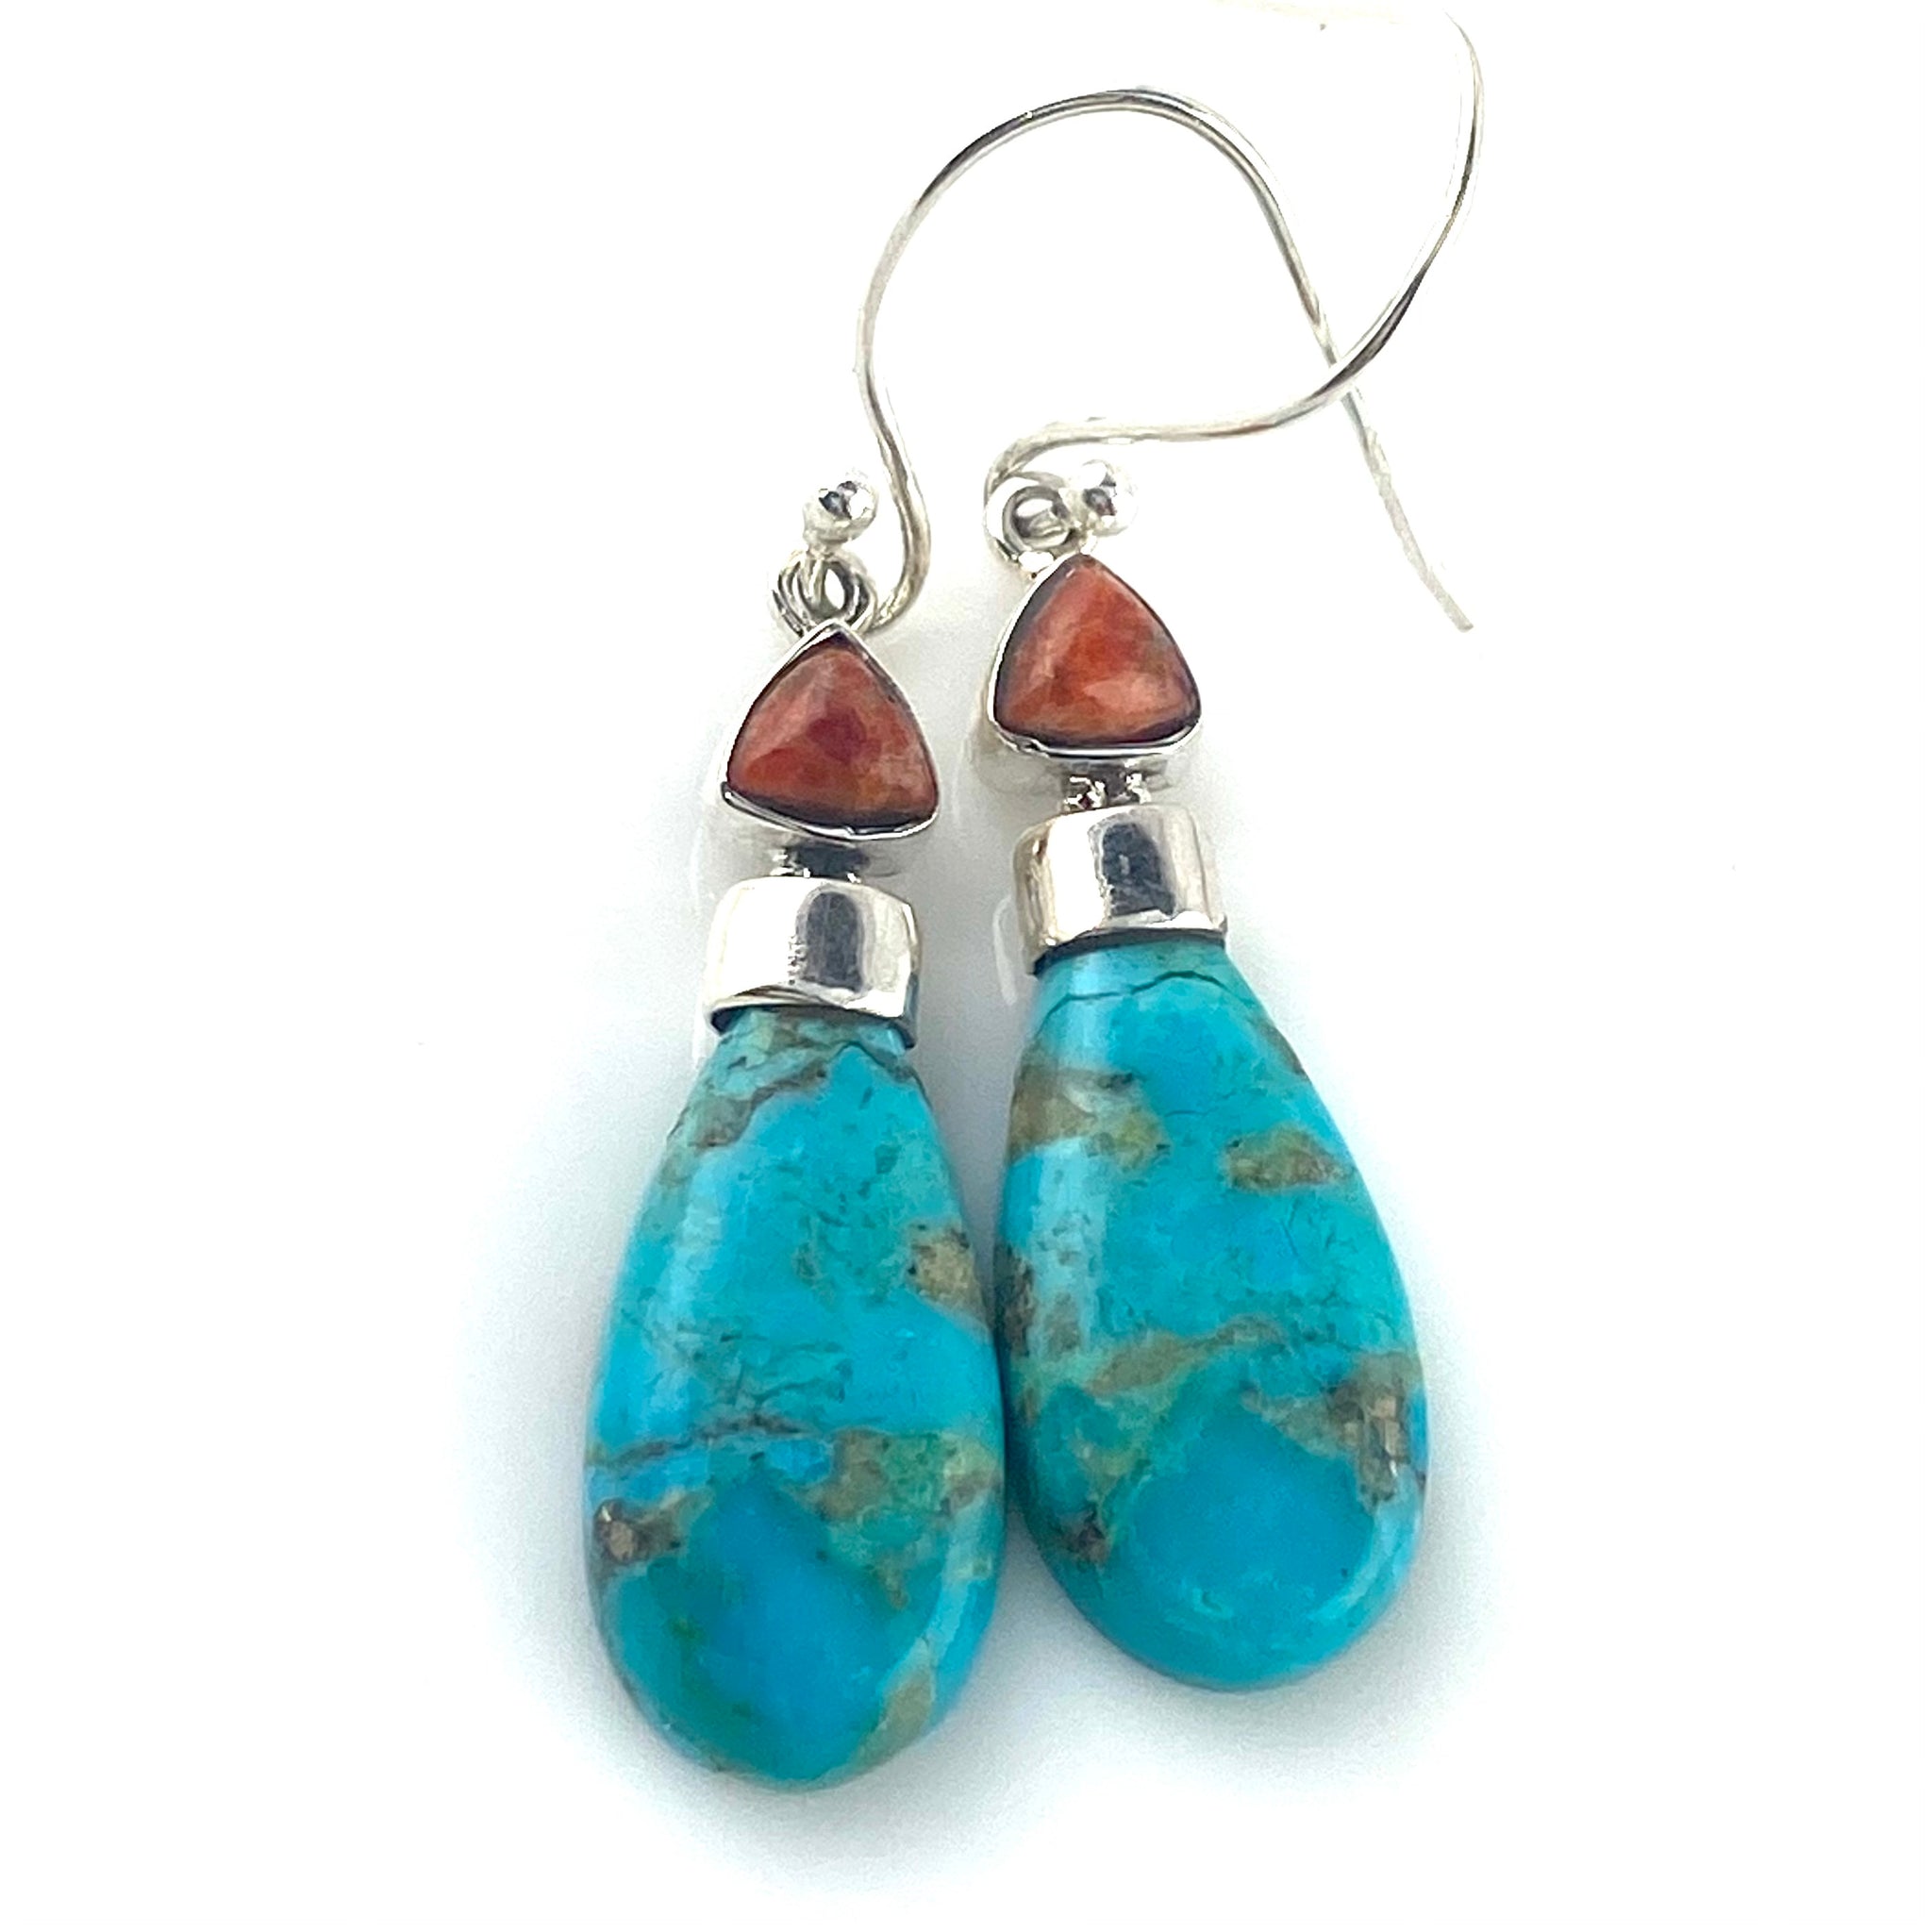 Turquoise & Coral Sterling Silver Earrings - Keja Designs Jewelry